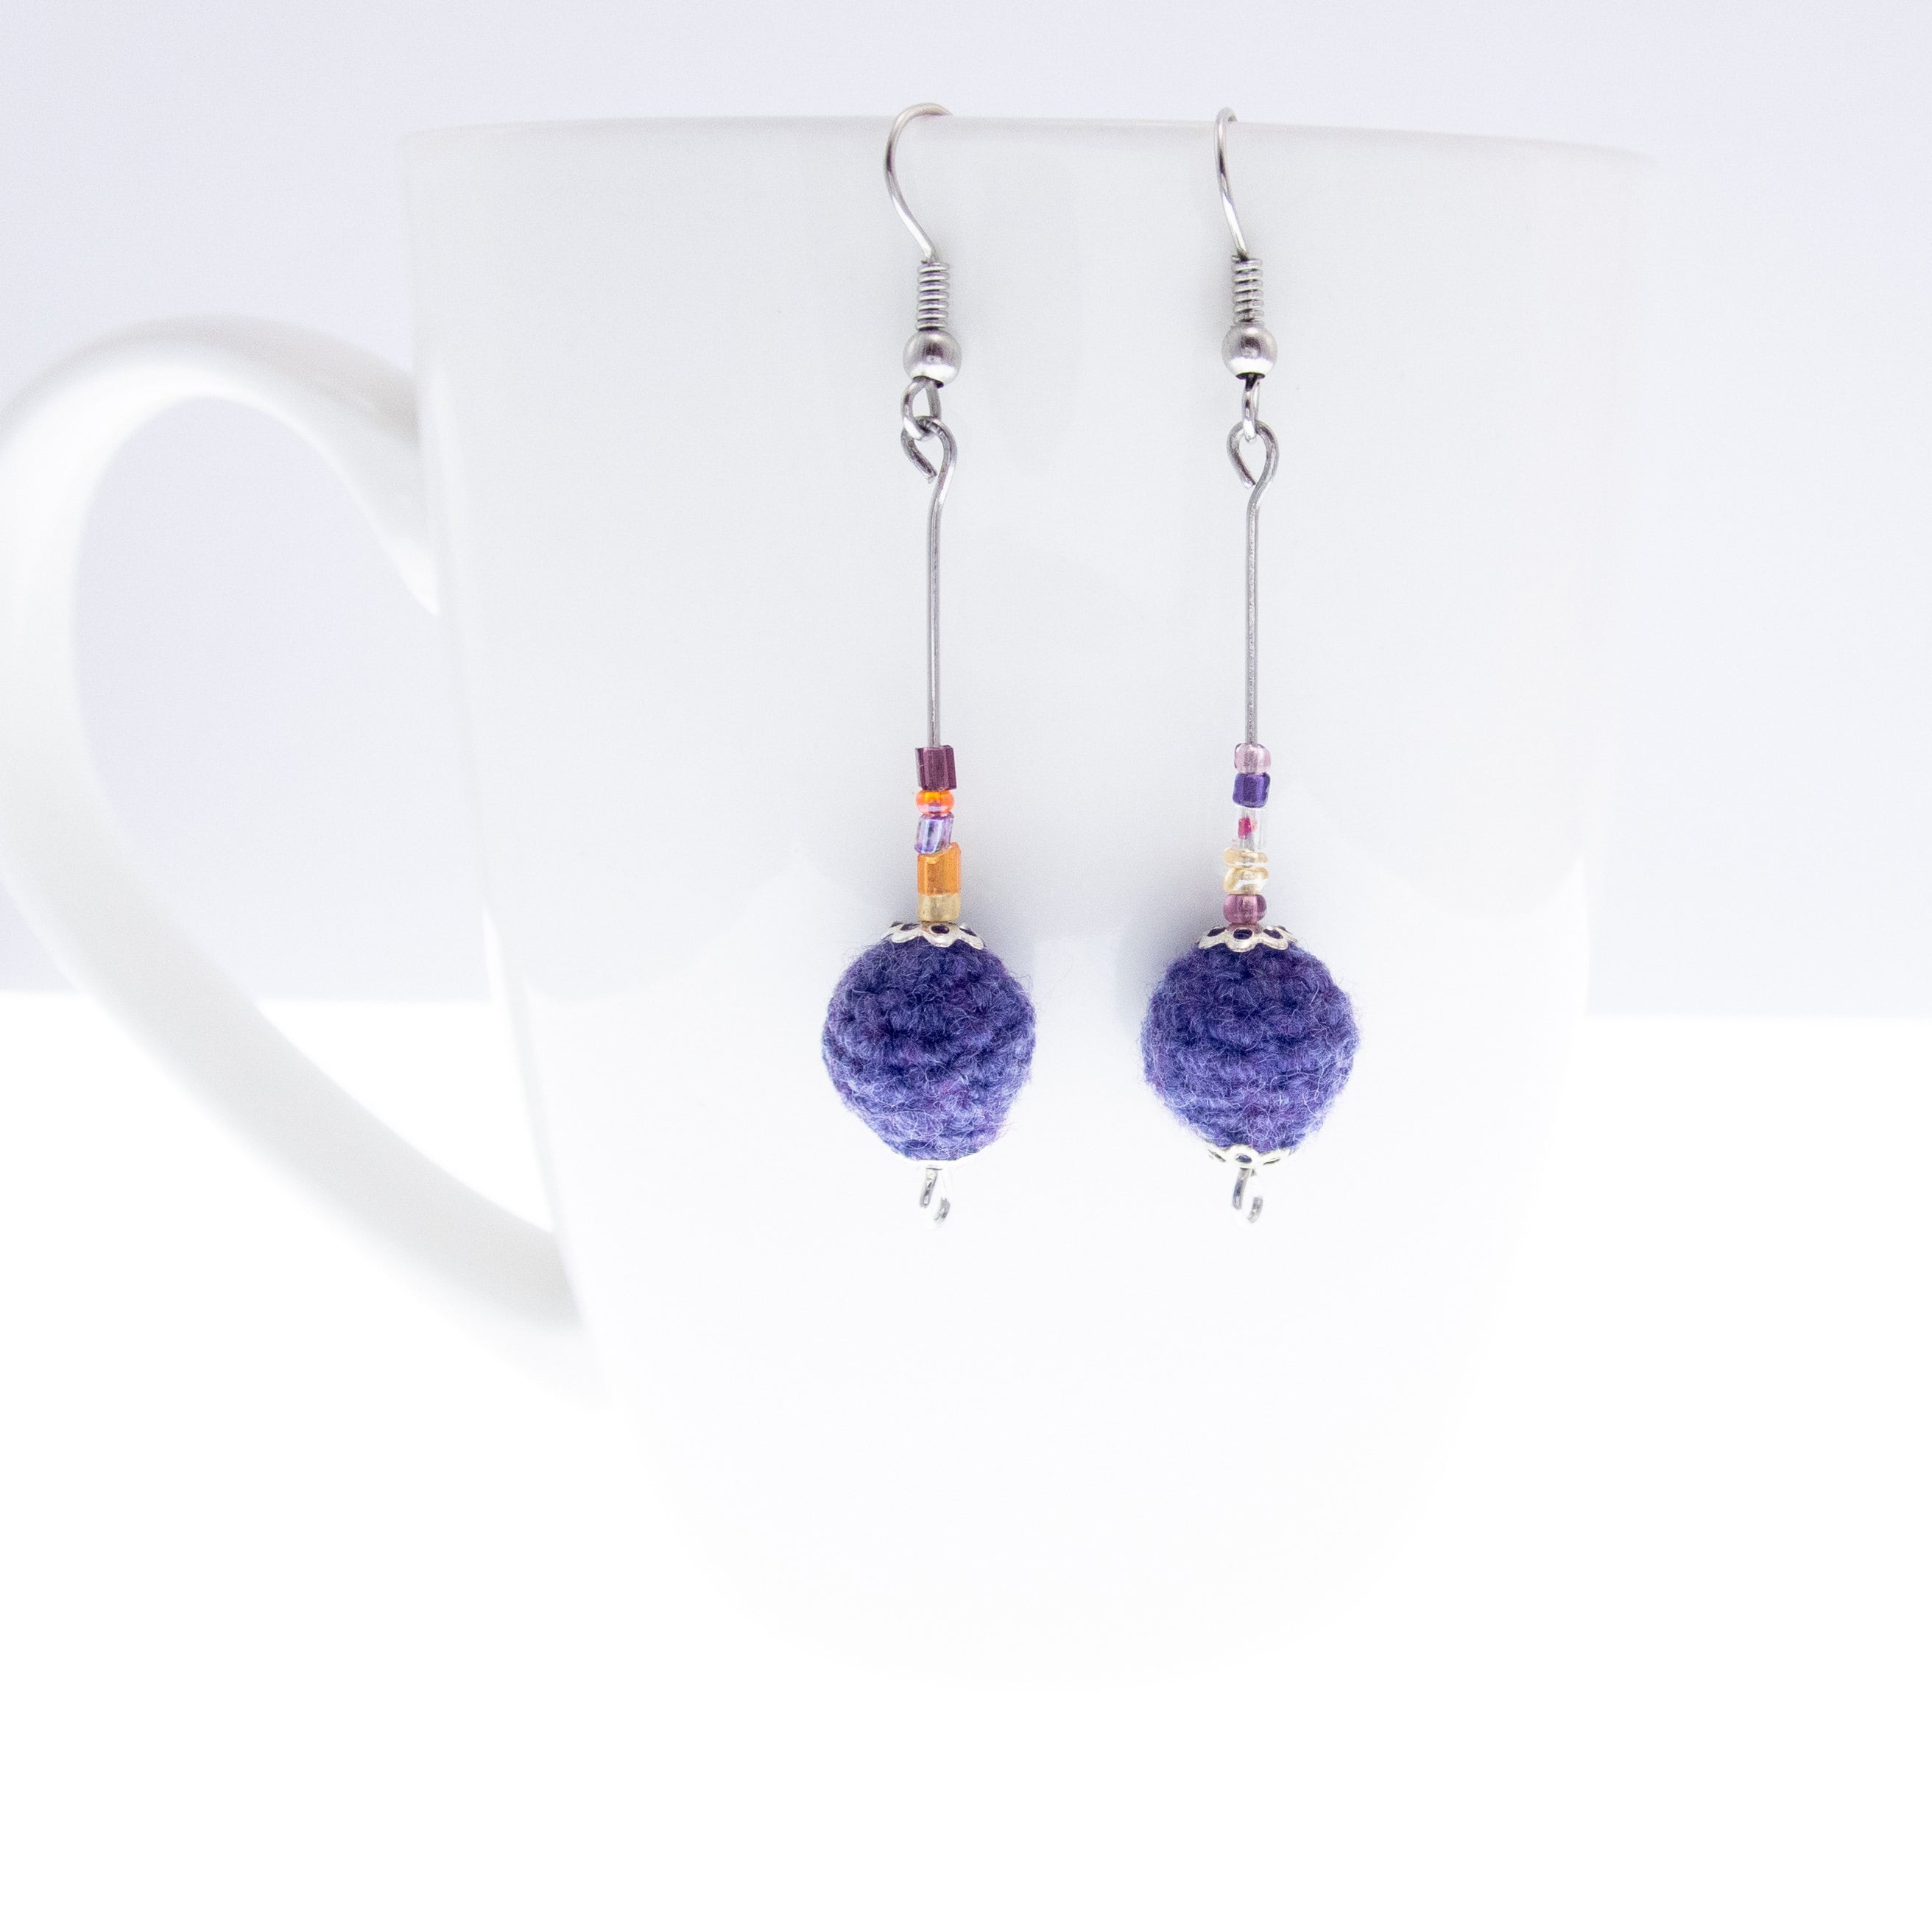 handmade statement earrings dangle with knitted purple balls